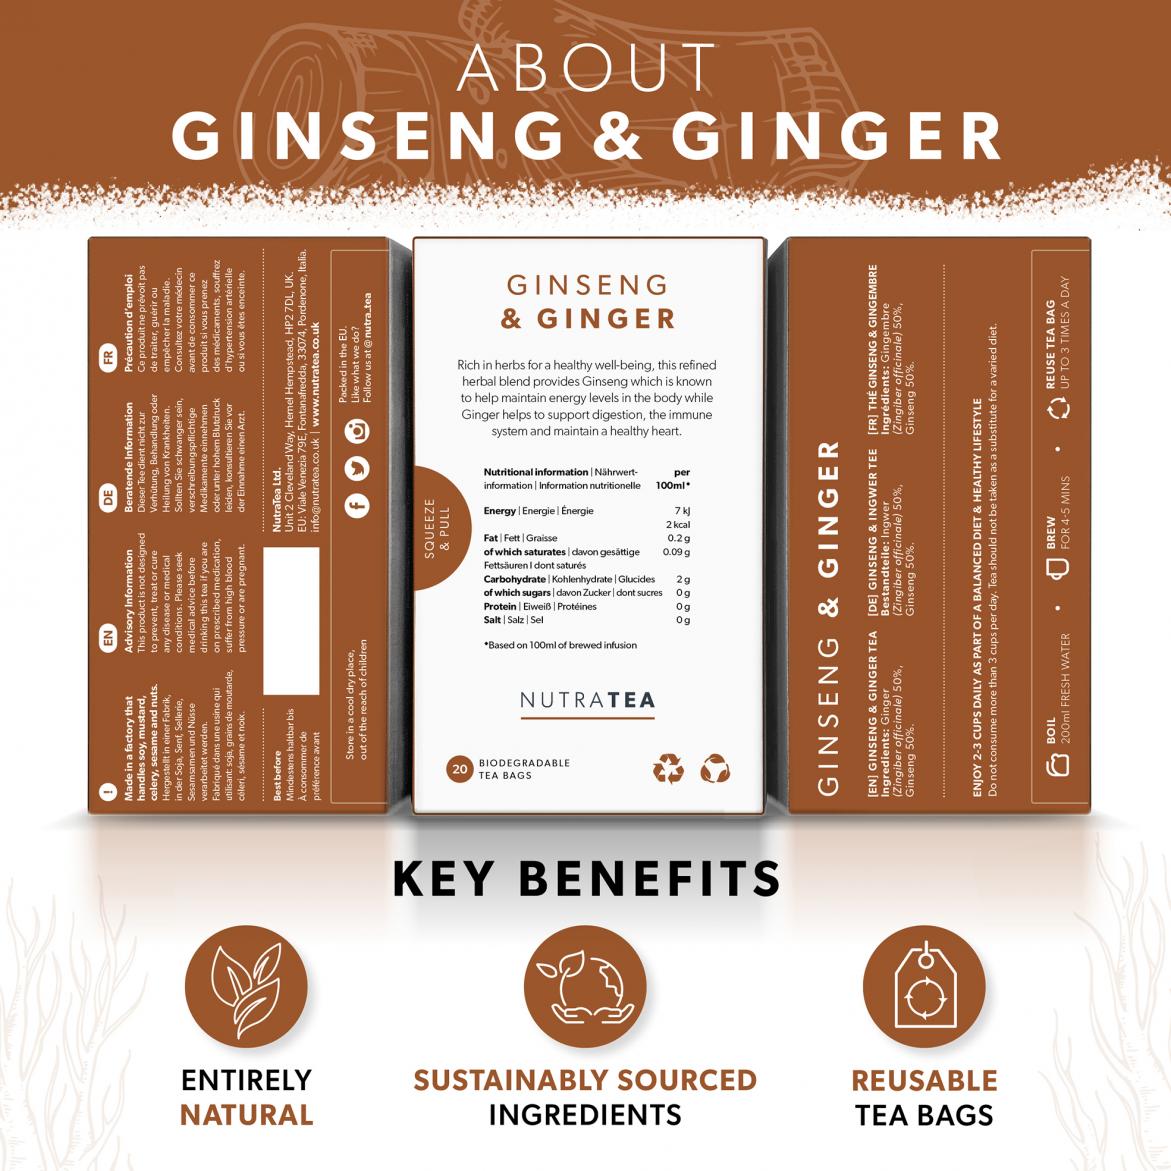 Nutratea Ginseng & Ginger Tea Bags 20's